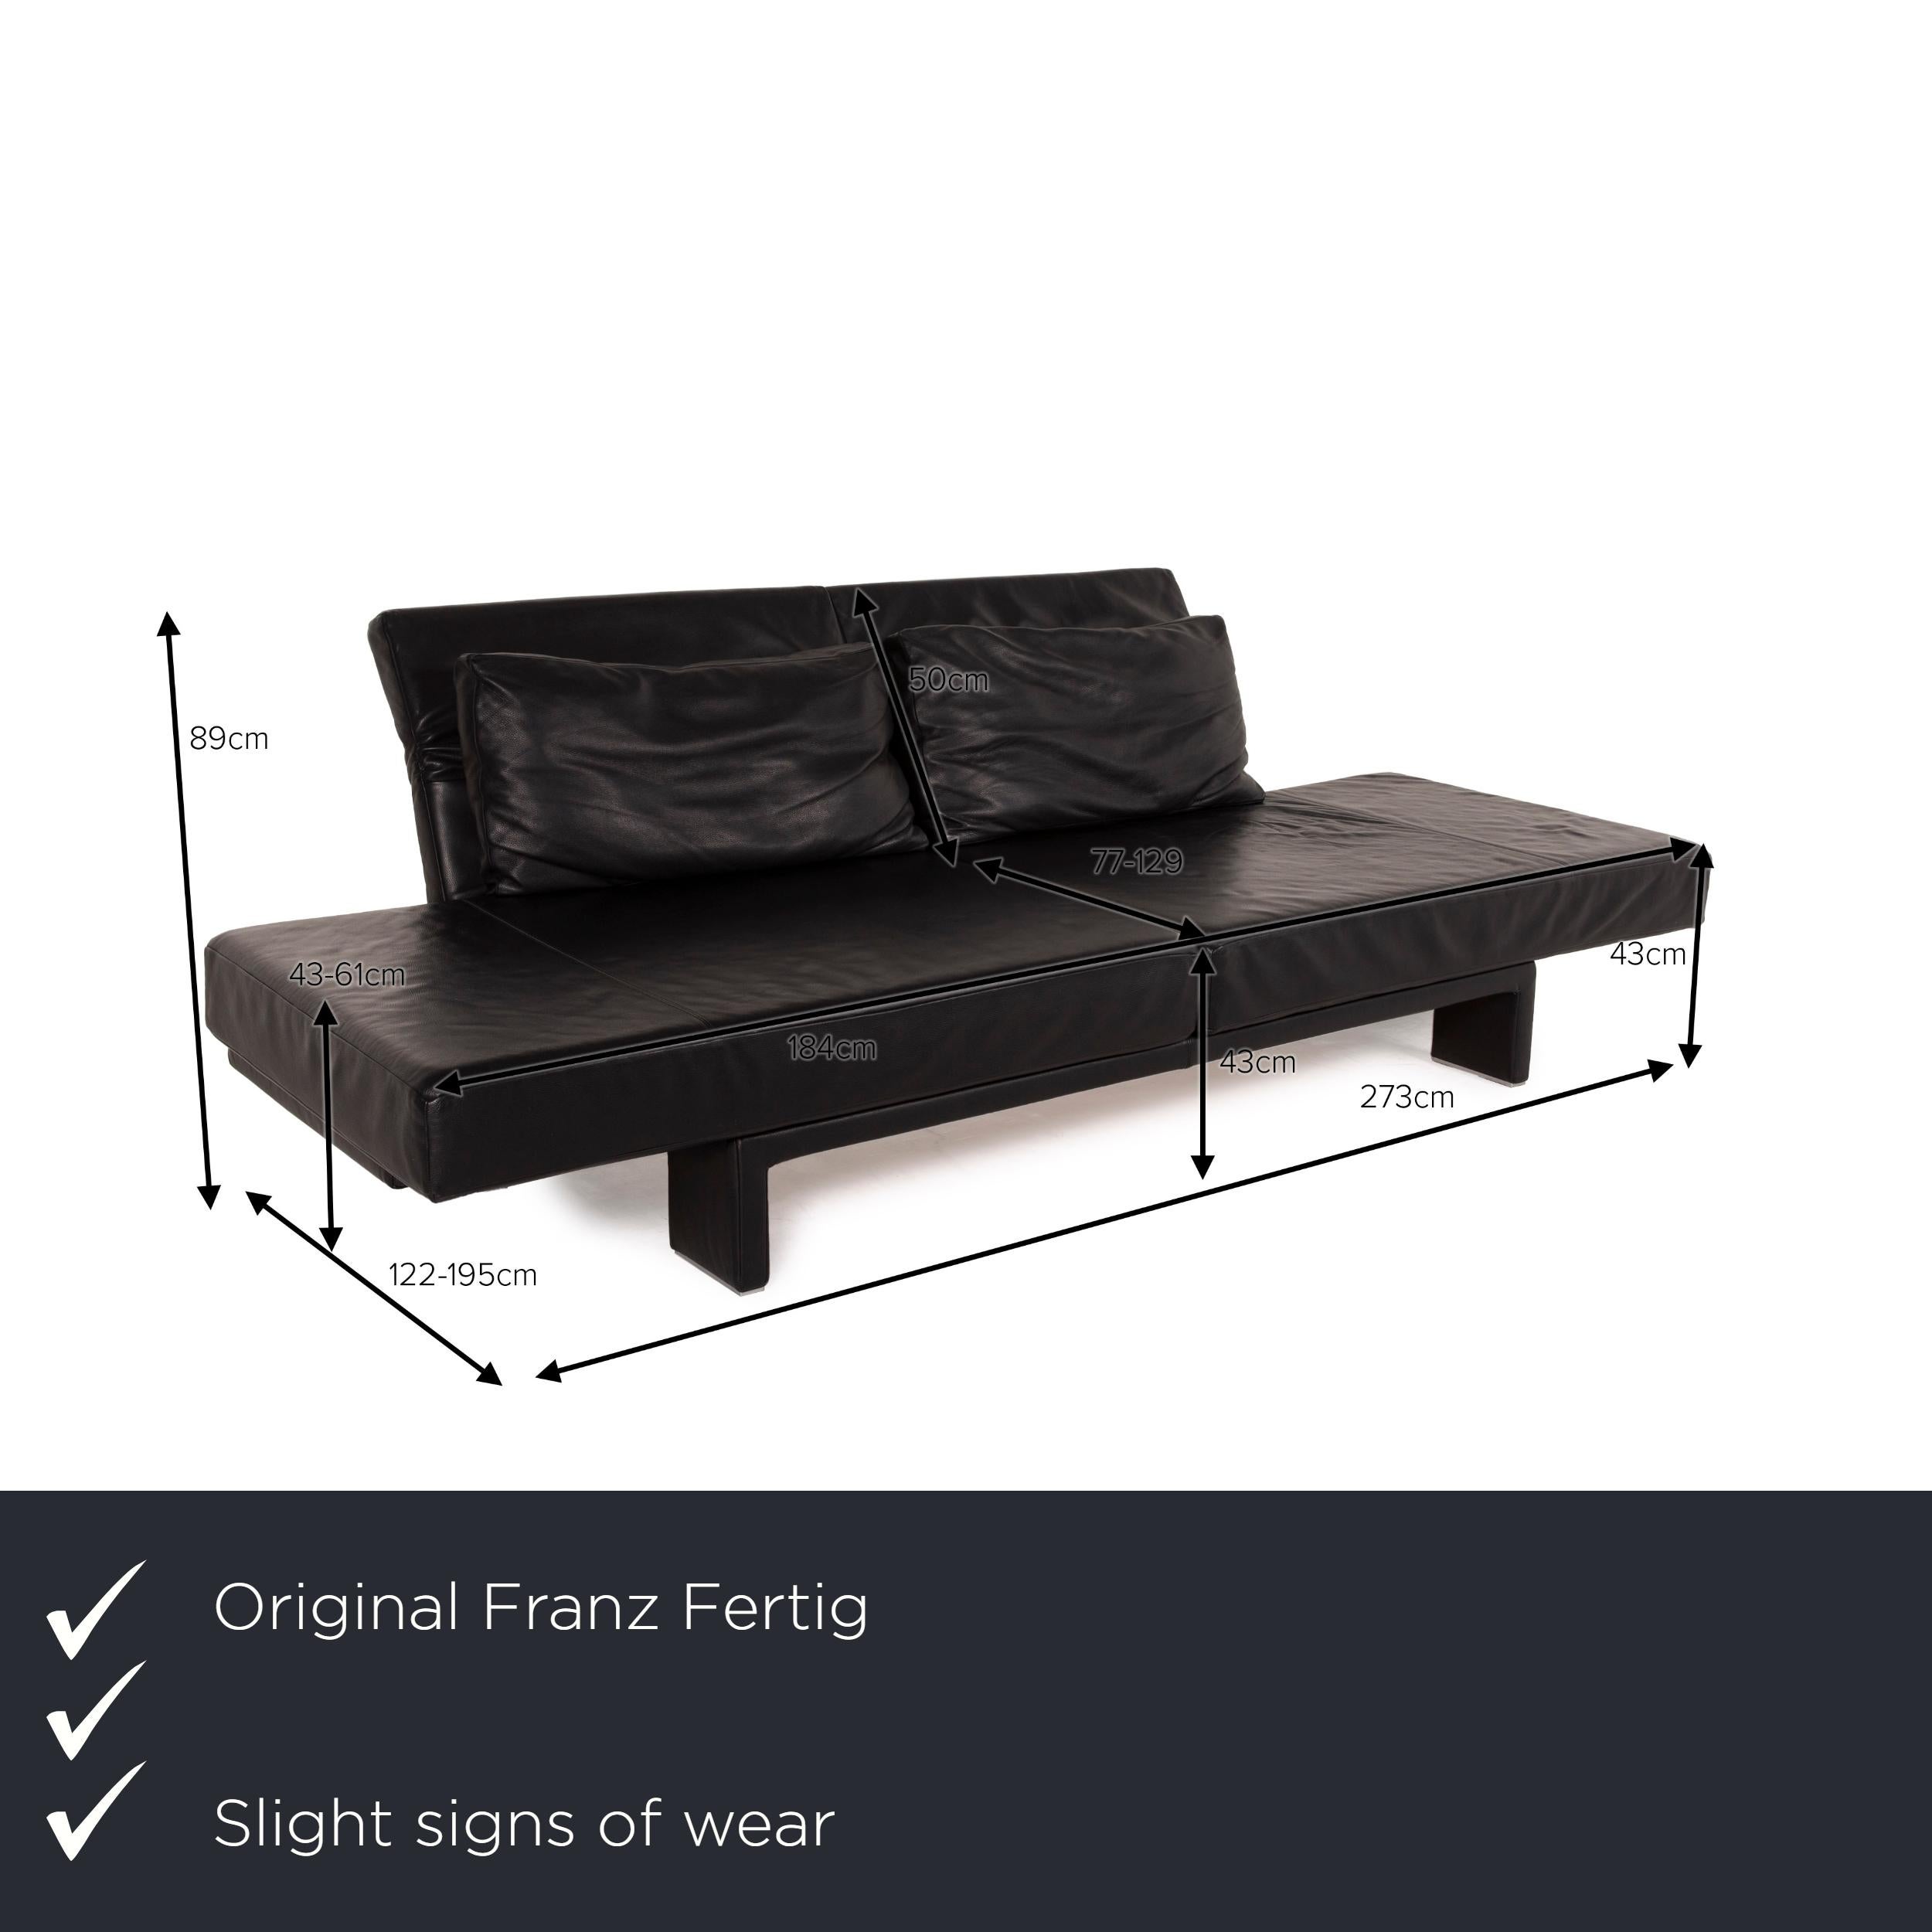 We present to you a Franz Fertig scene leather sofa black reclining function.

 
 Product measurements in centimeters:
 

Depth: 122
Width: 273
Height: 89
Seat height: 43
Rest height: 43
Seat depth: 77
Seat width: 184
Back height: 50.
 